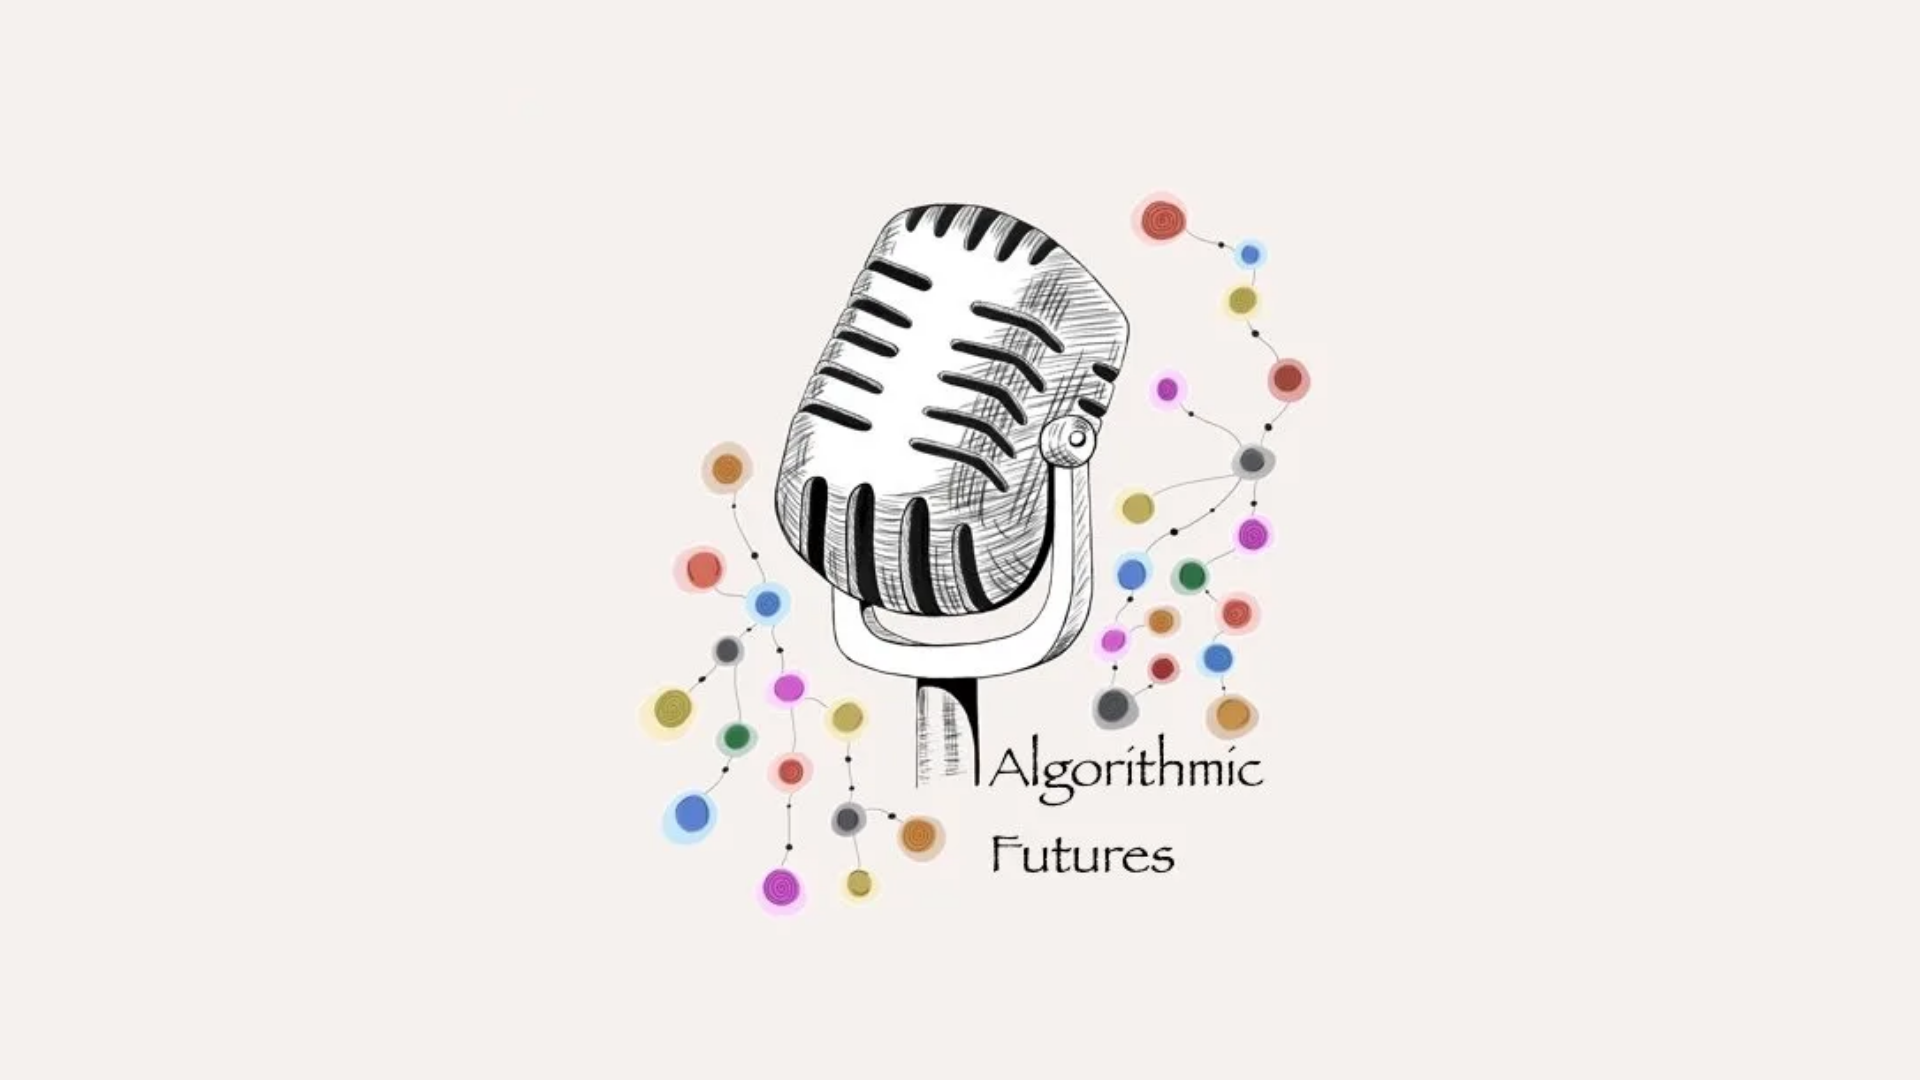 Episode 4: Banking pasts and futures
